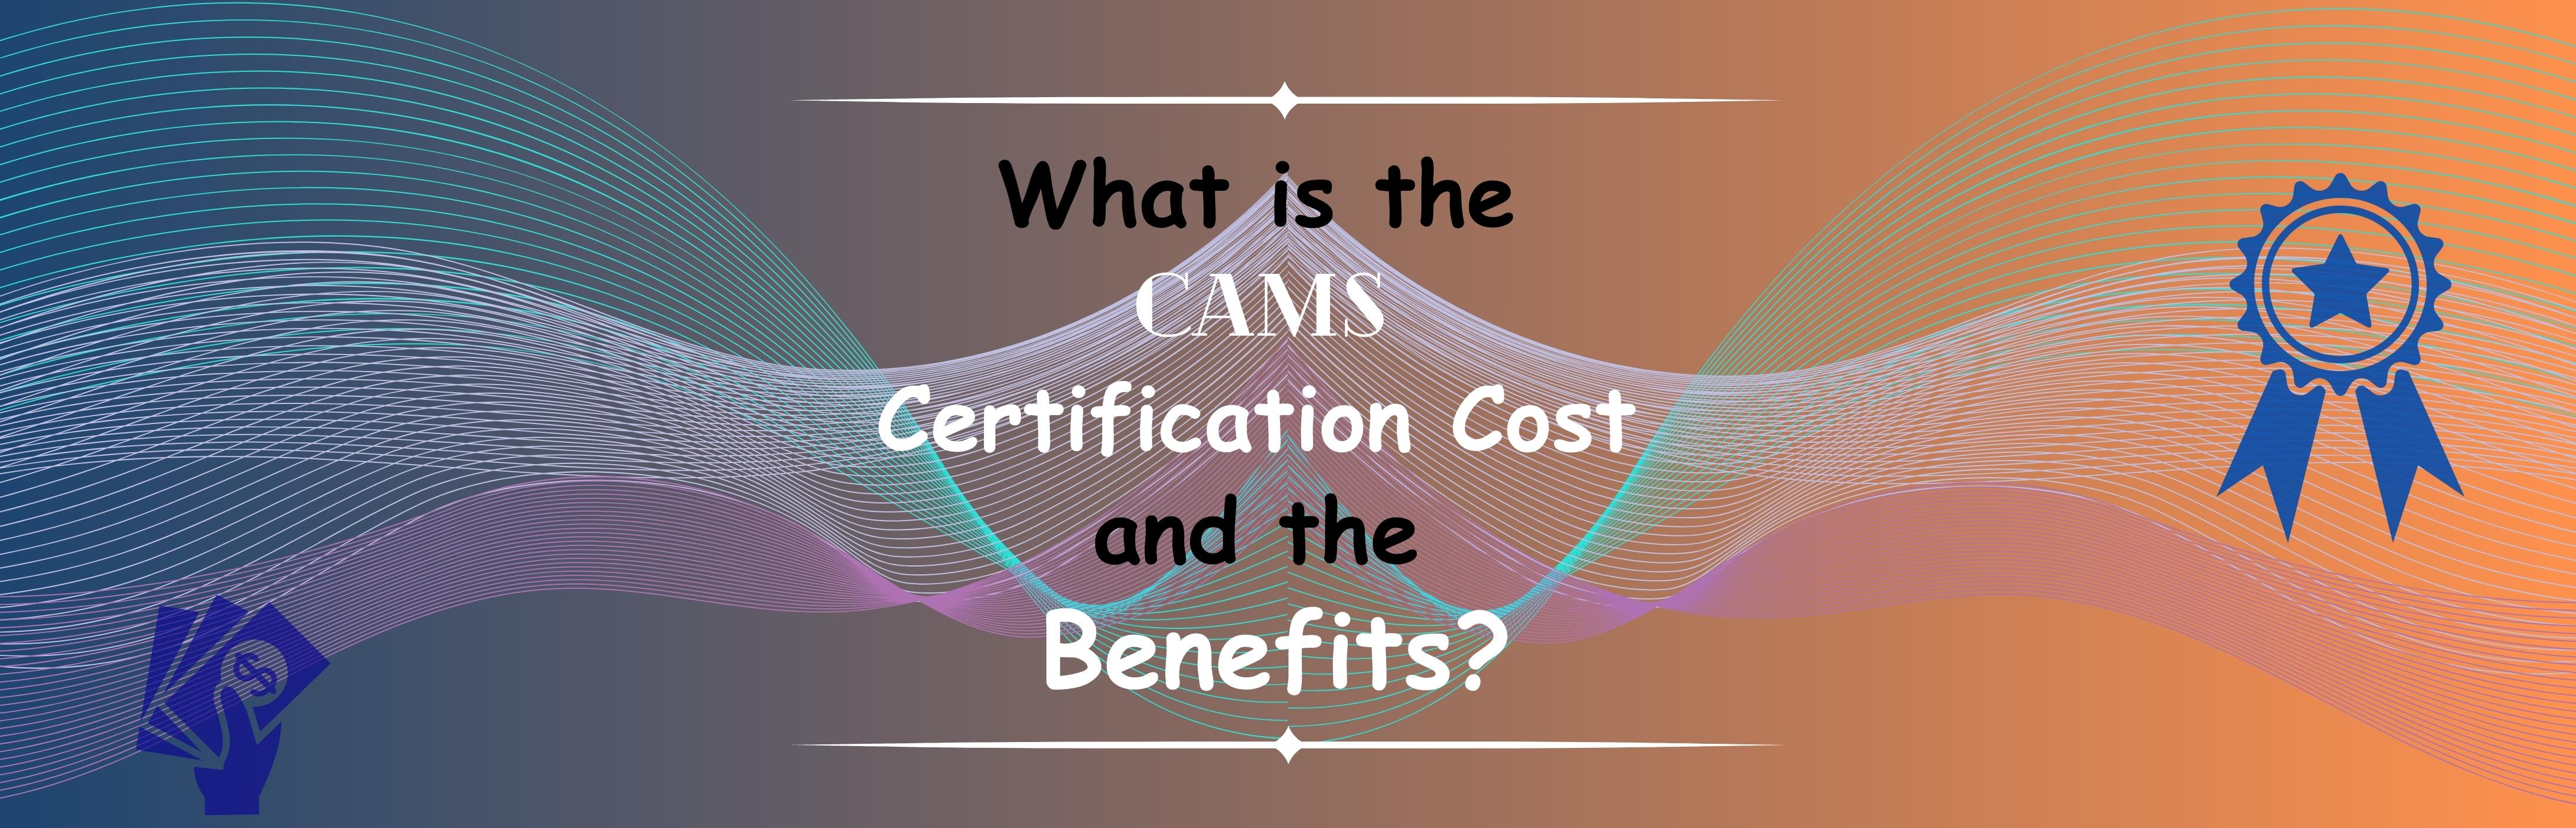 CAMS Certification Cost and the Benefits